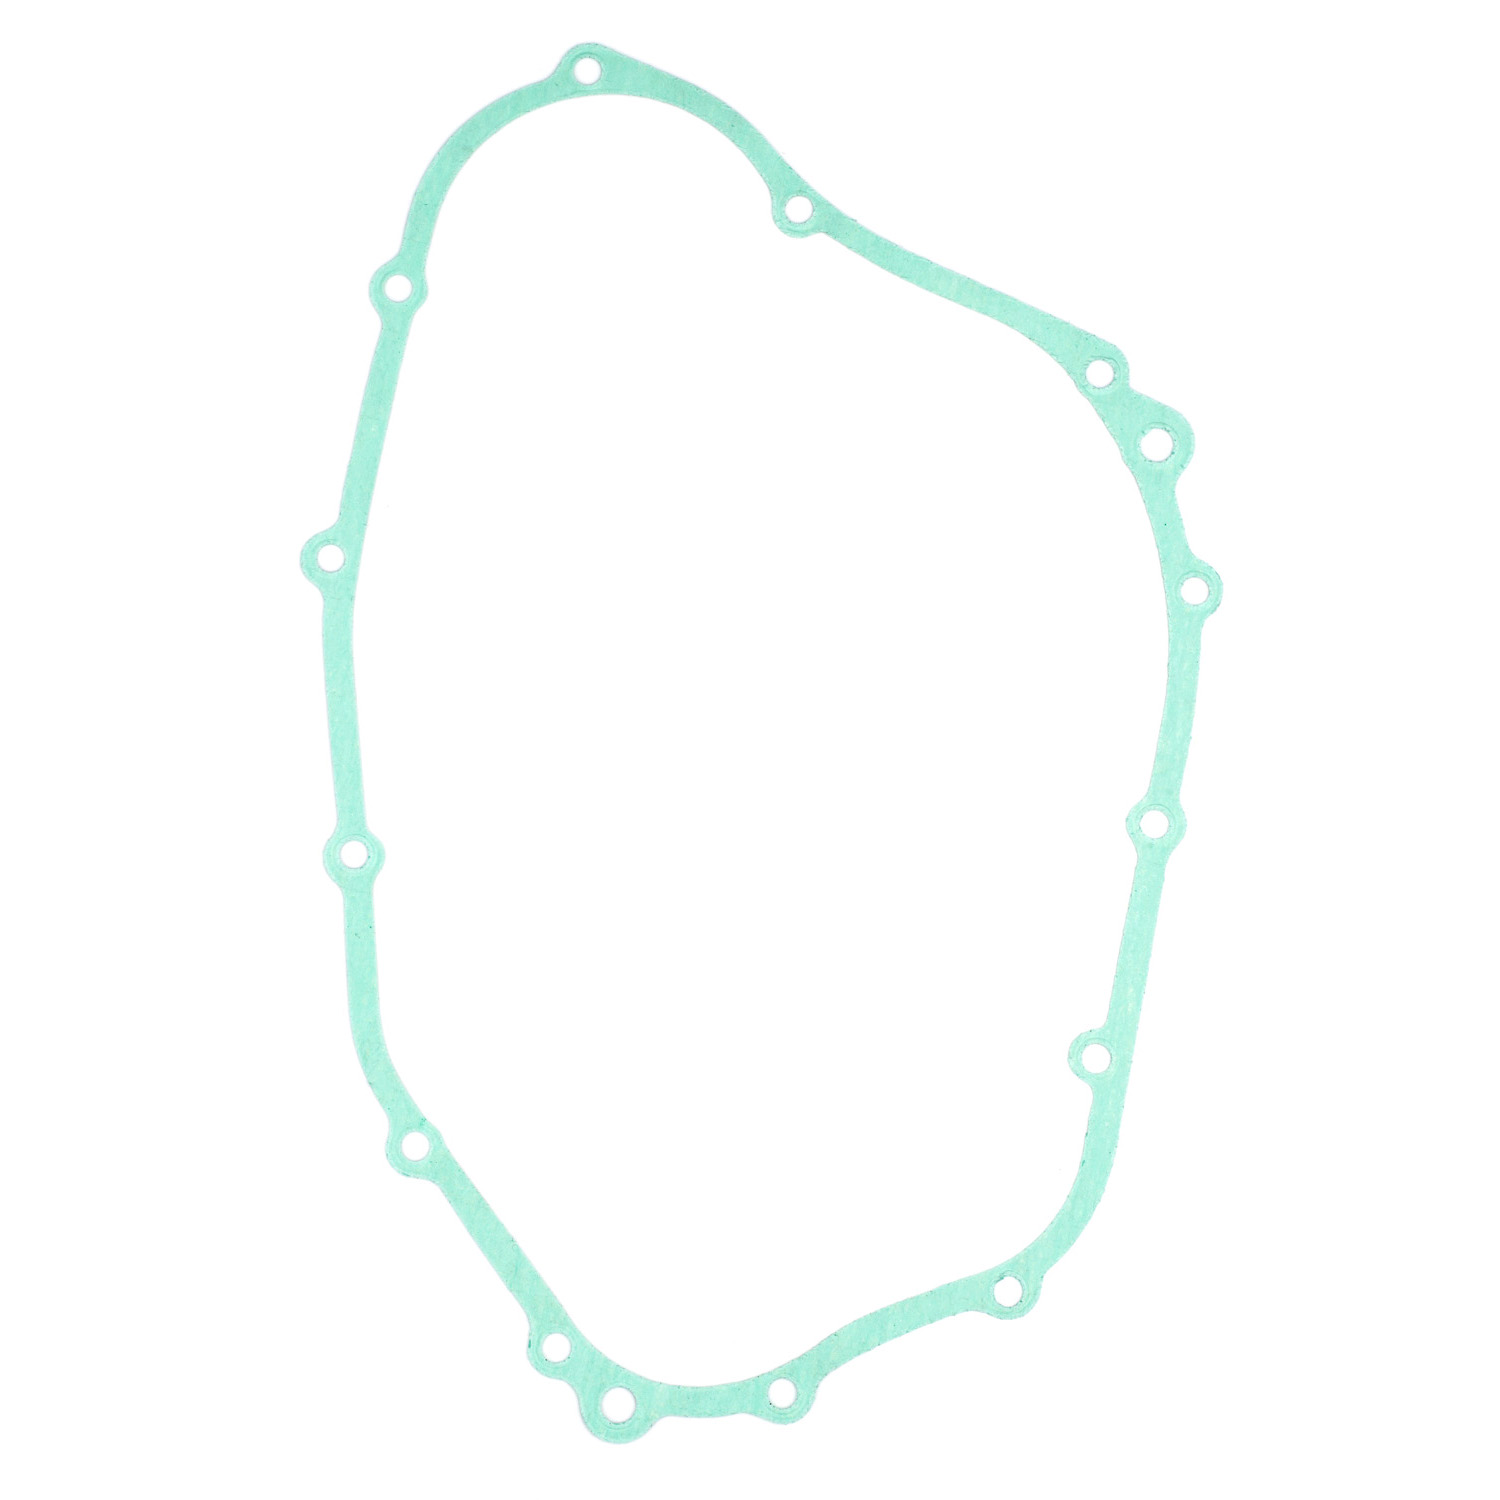 XS1100 Clutch Cover Gasket